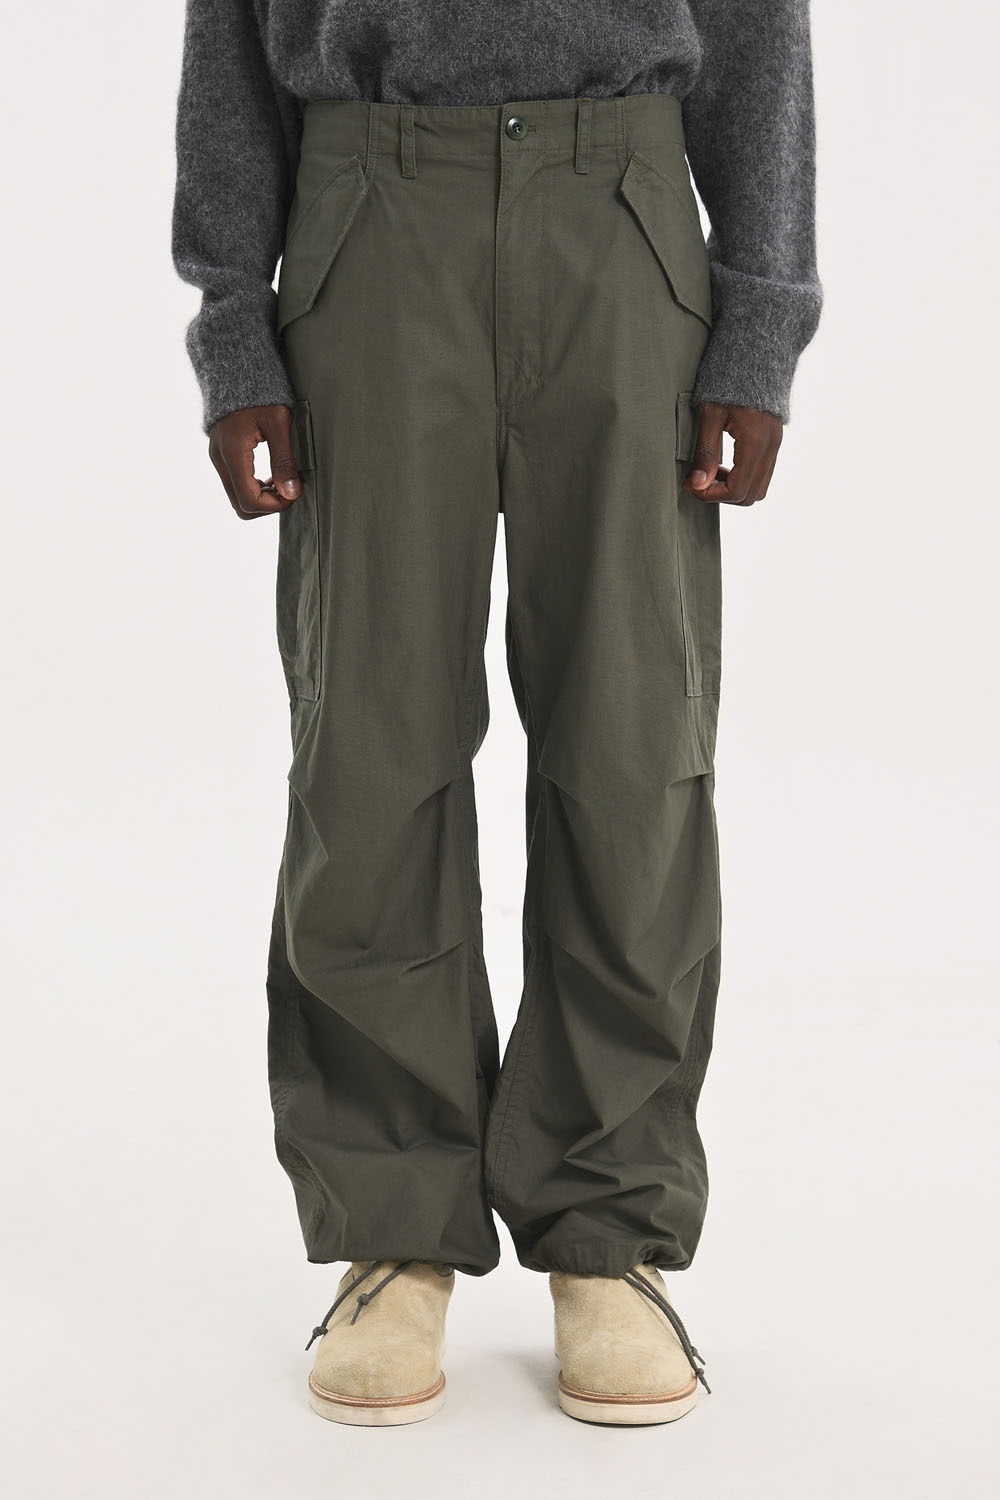 Military Field Pants-Olive